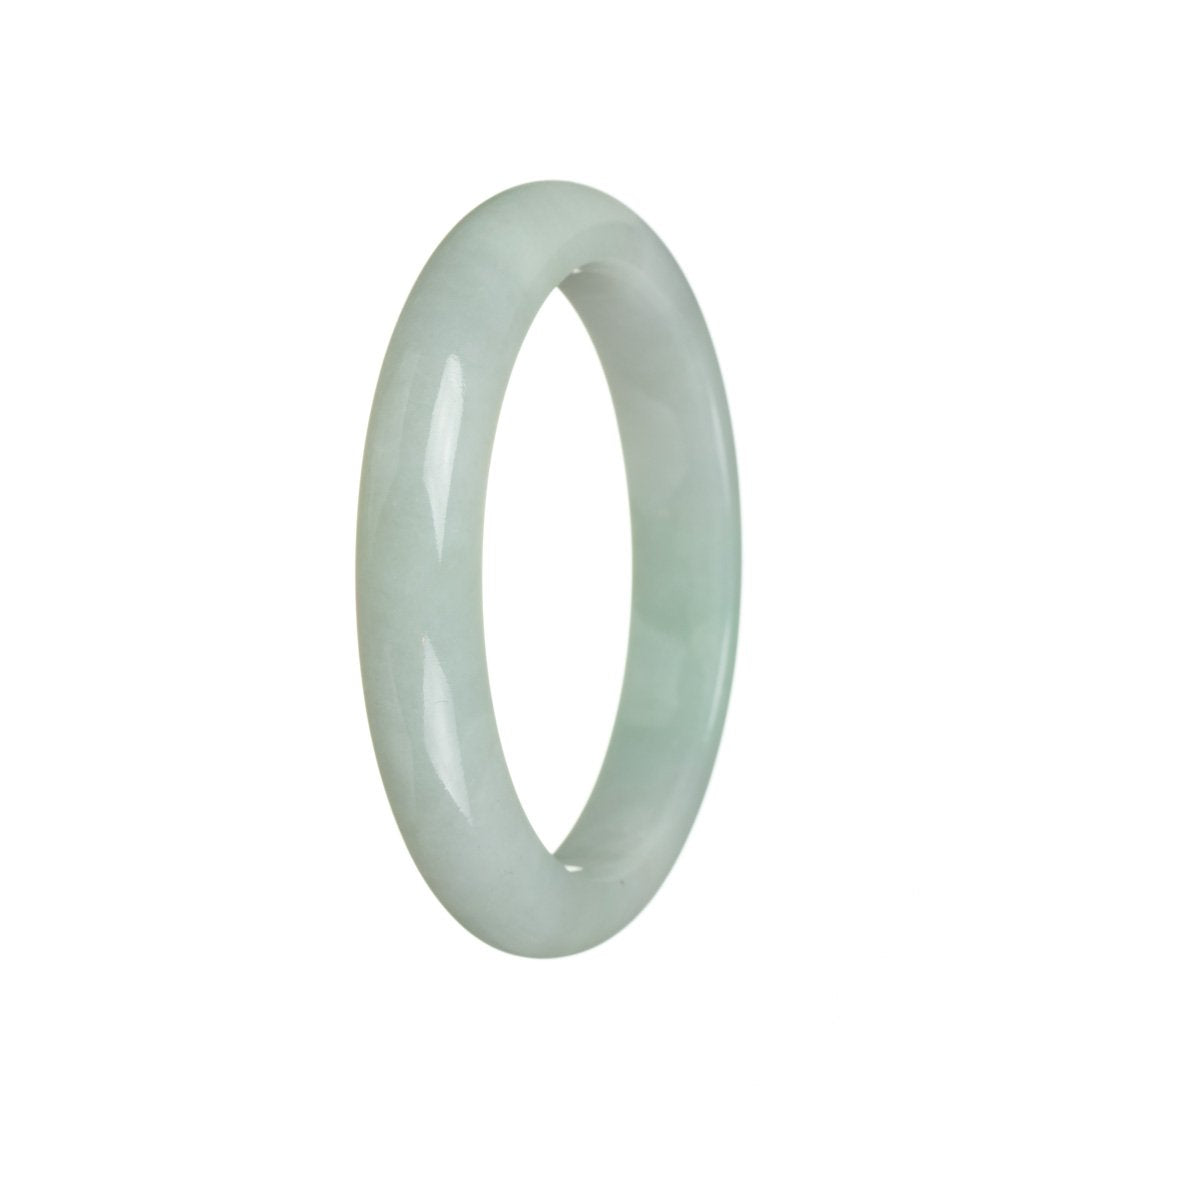 A light green, semi-round jade bangle bracelet, made from authentic untreated Burmese jade. The bangle has a diameter of 54mm and features a smooth, polished surface. The jade has a delicate, light green color, giving it a natural and elegant appearance. It is a beautiful piece of jewelry, perfect for adding a touch of sophistication to any outfit.